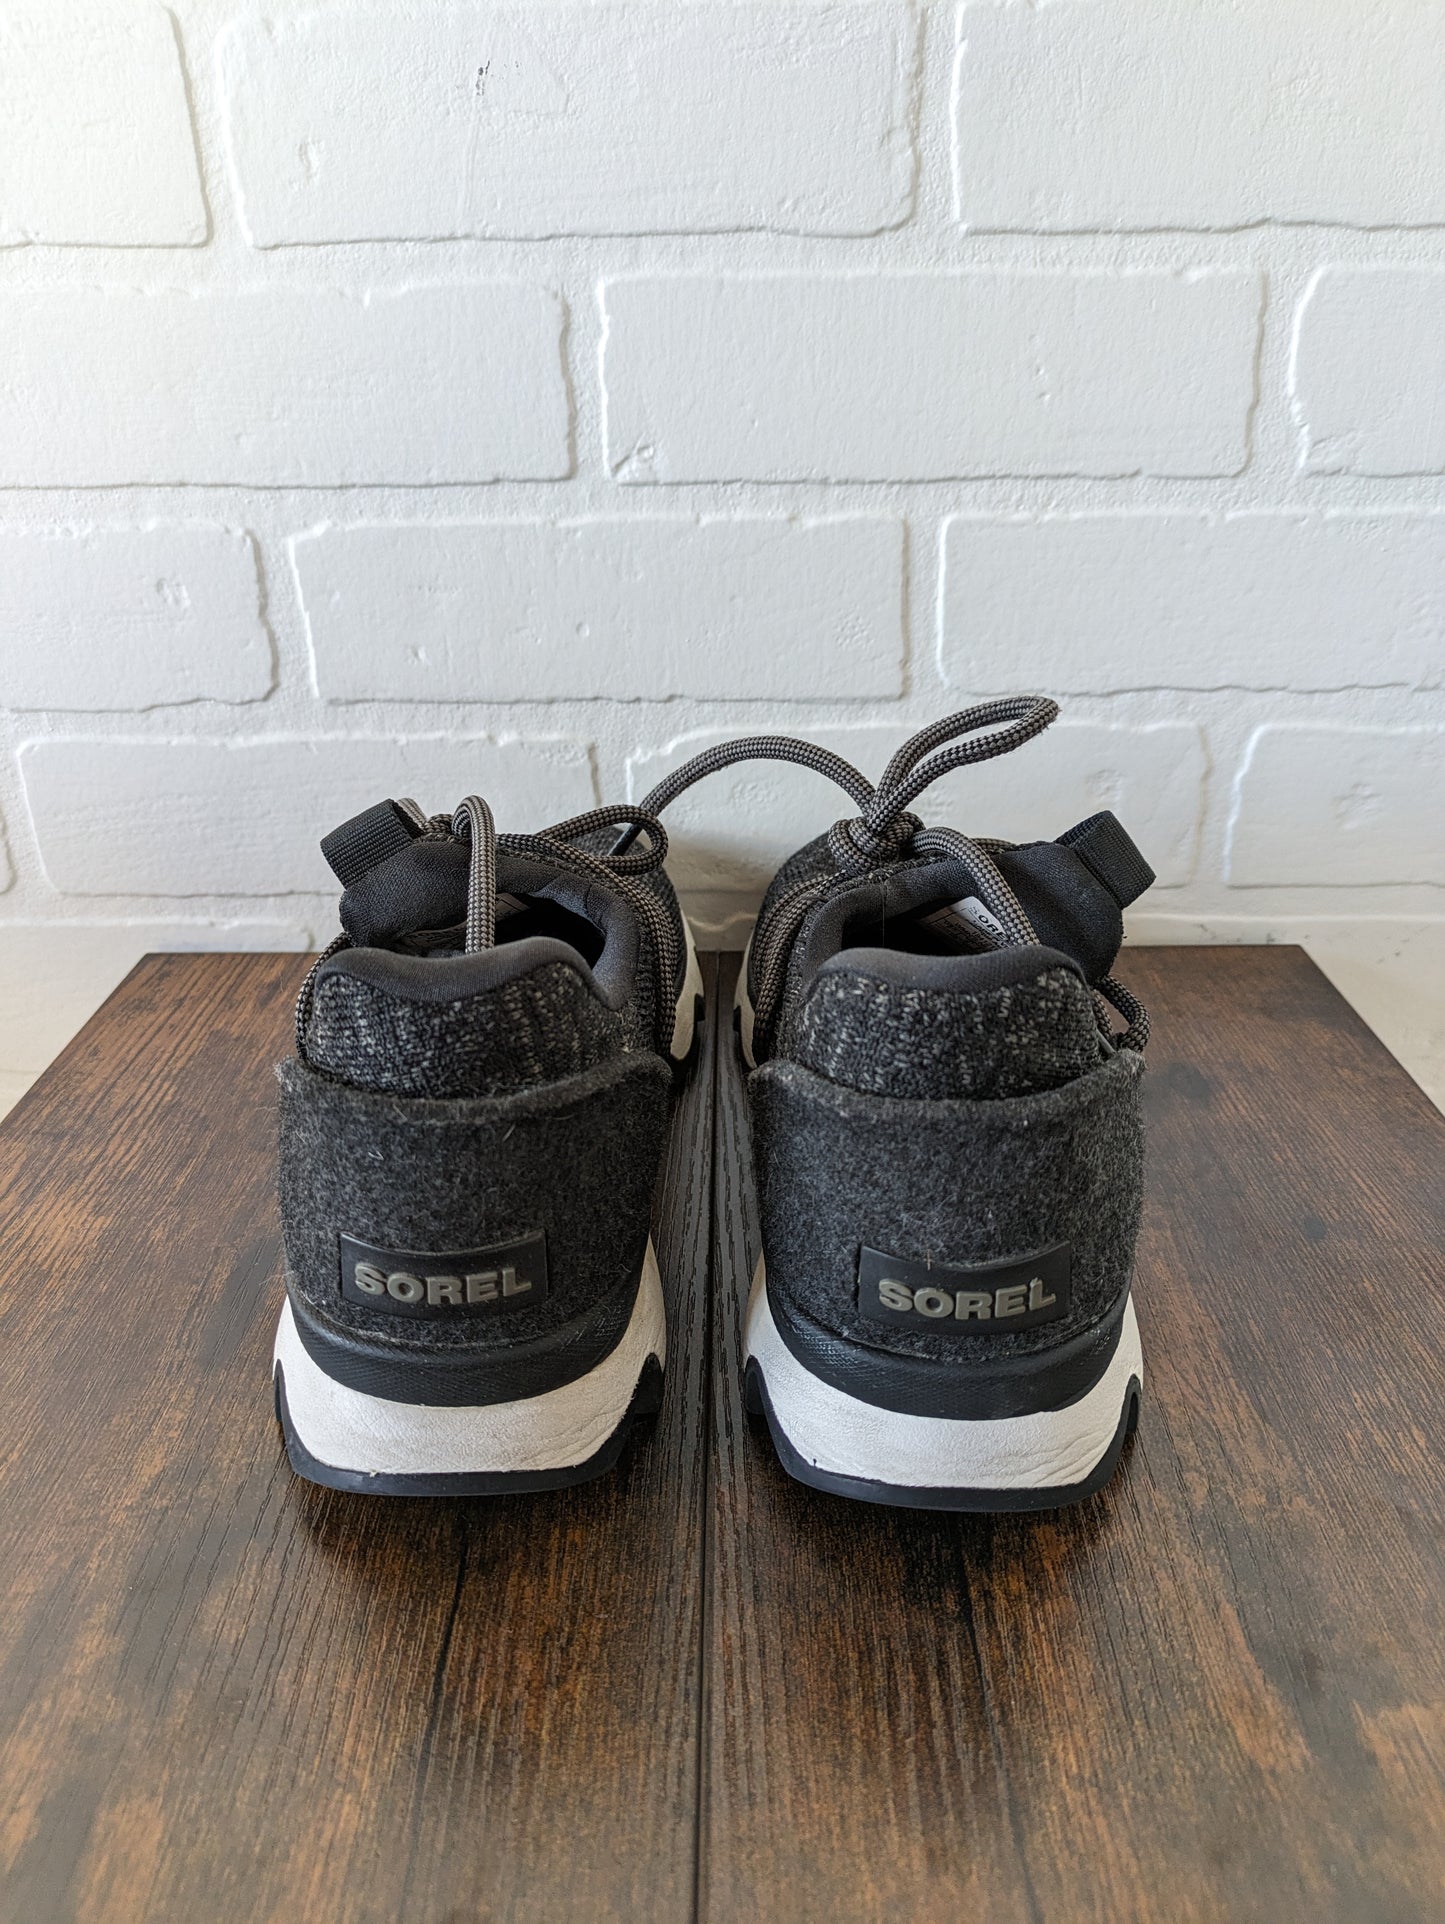 Shoes Sneakers By Sorel  Size: 7